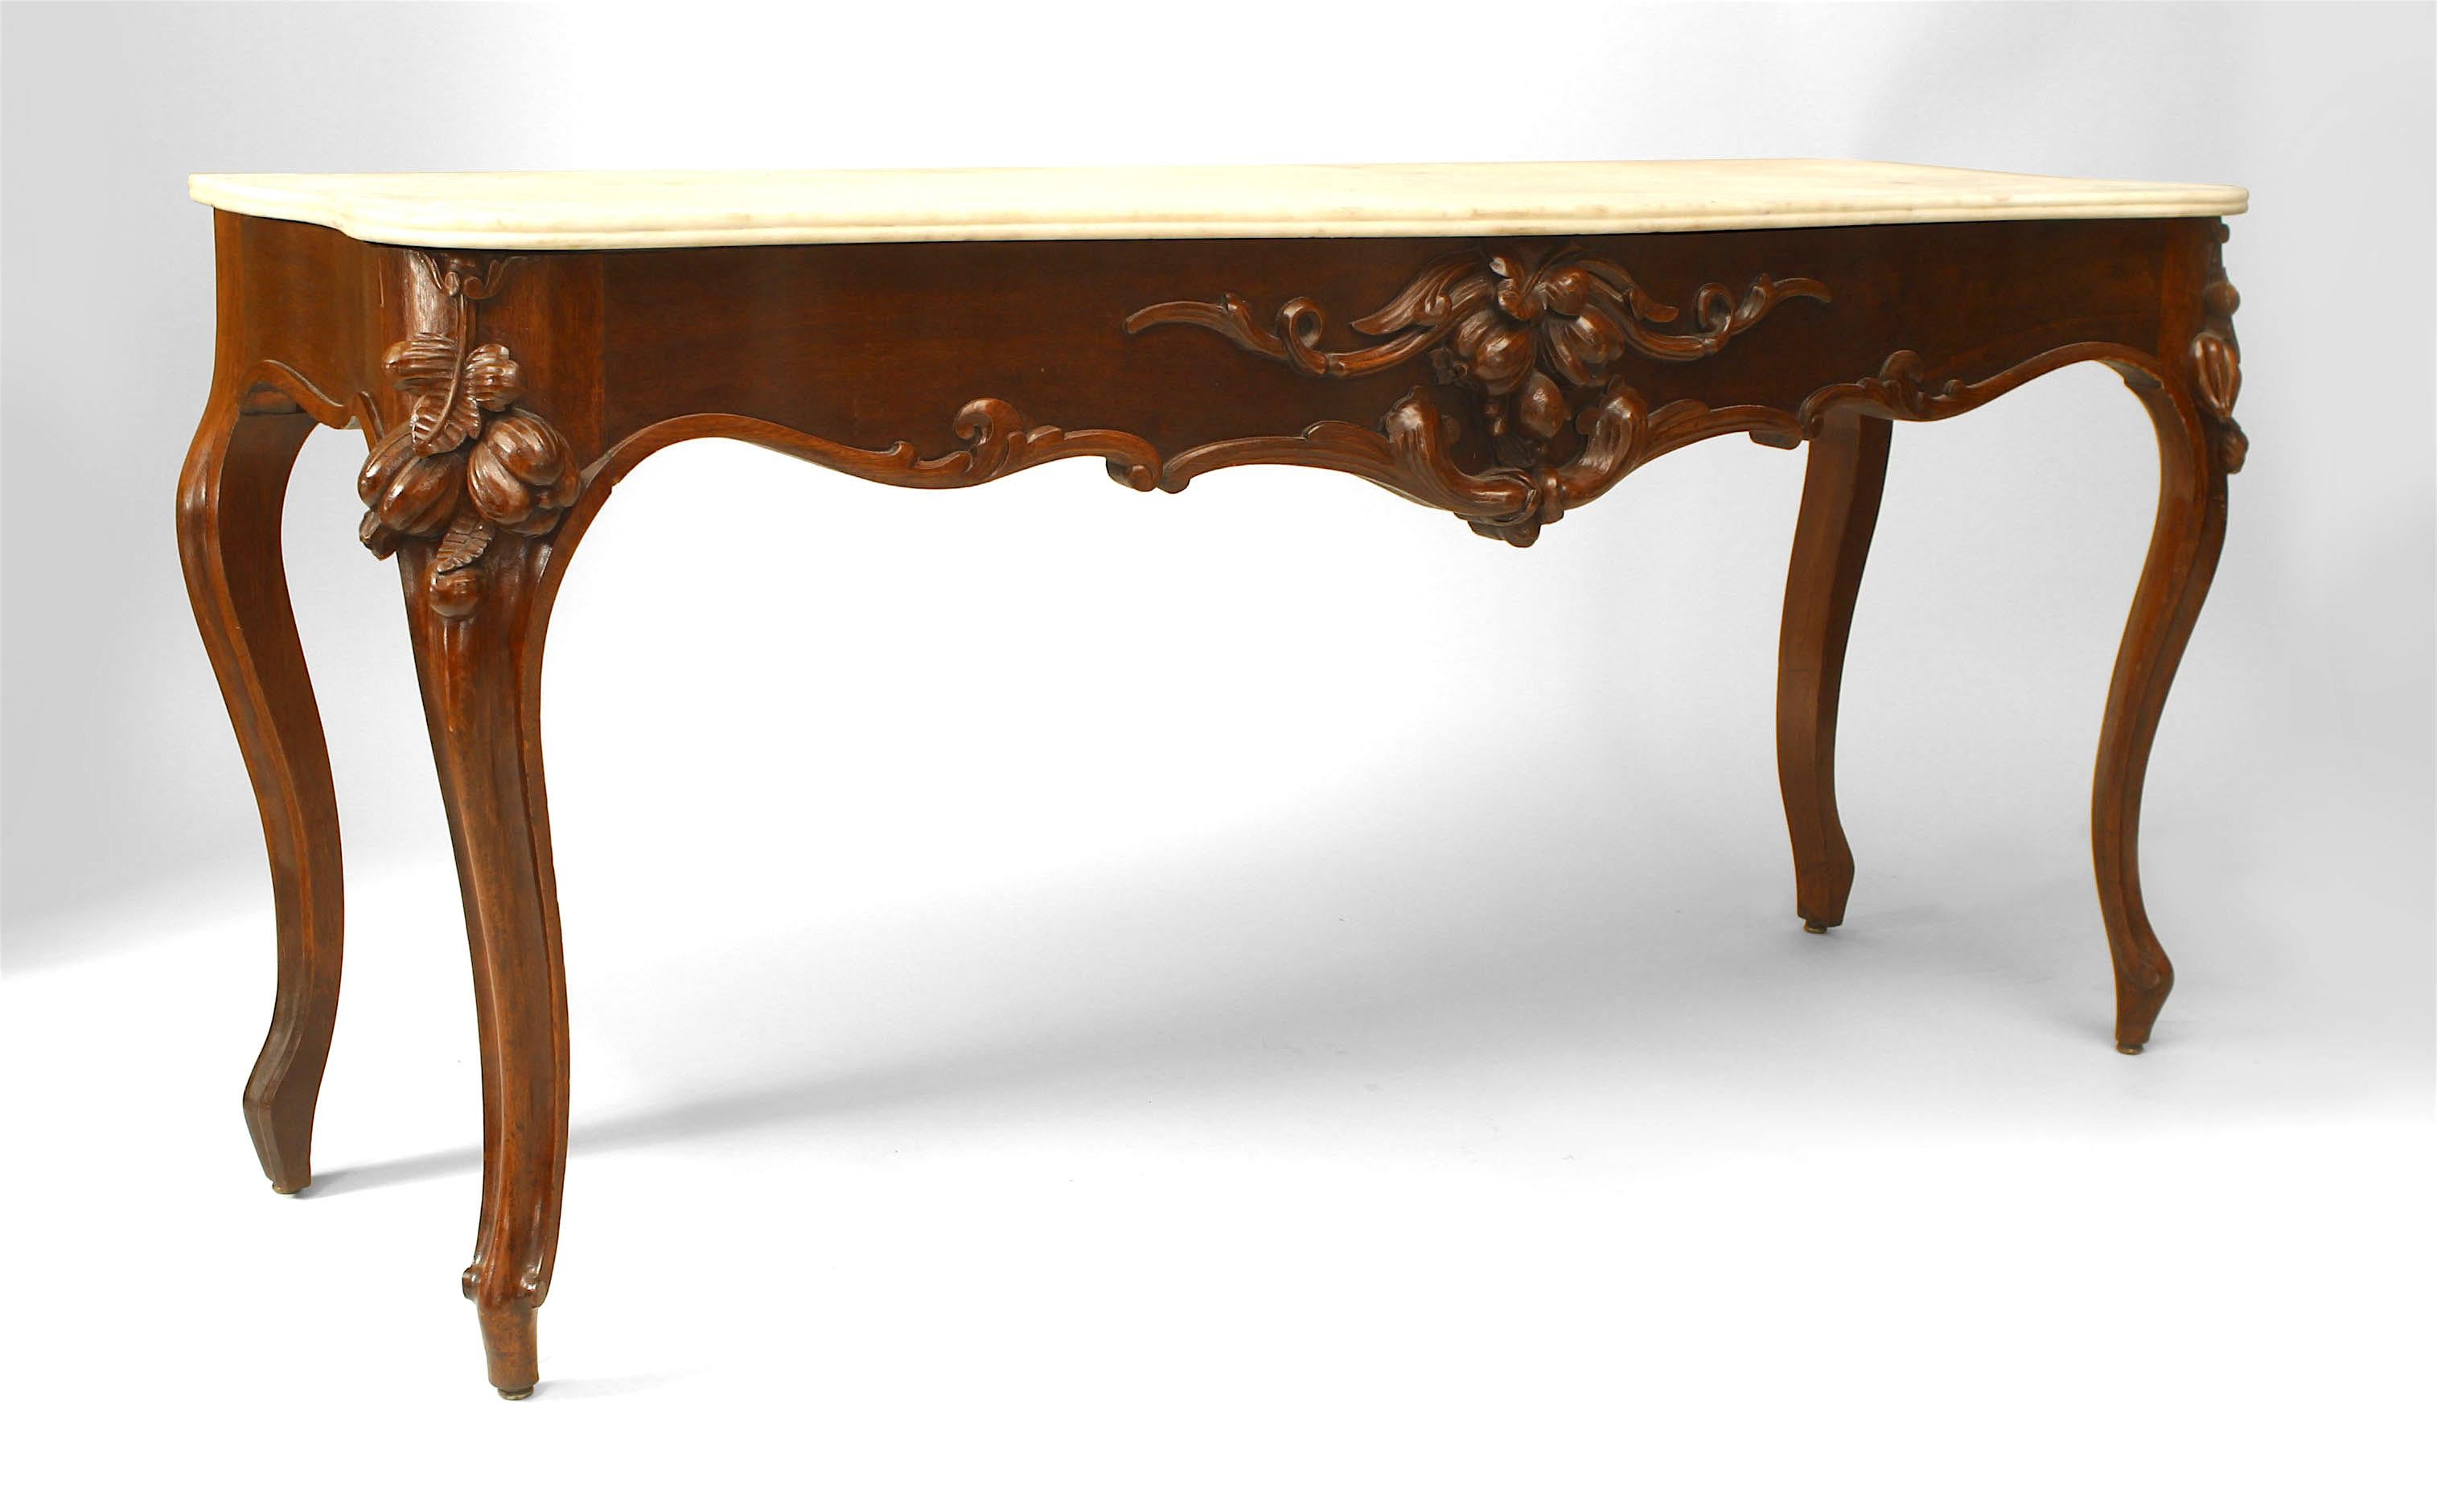 Pair of American Victorian mahogany serpentine front console tables with white marble top (PRICED AS Pair)
